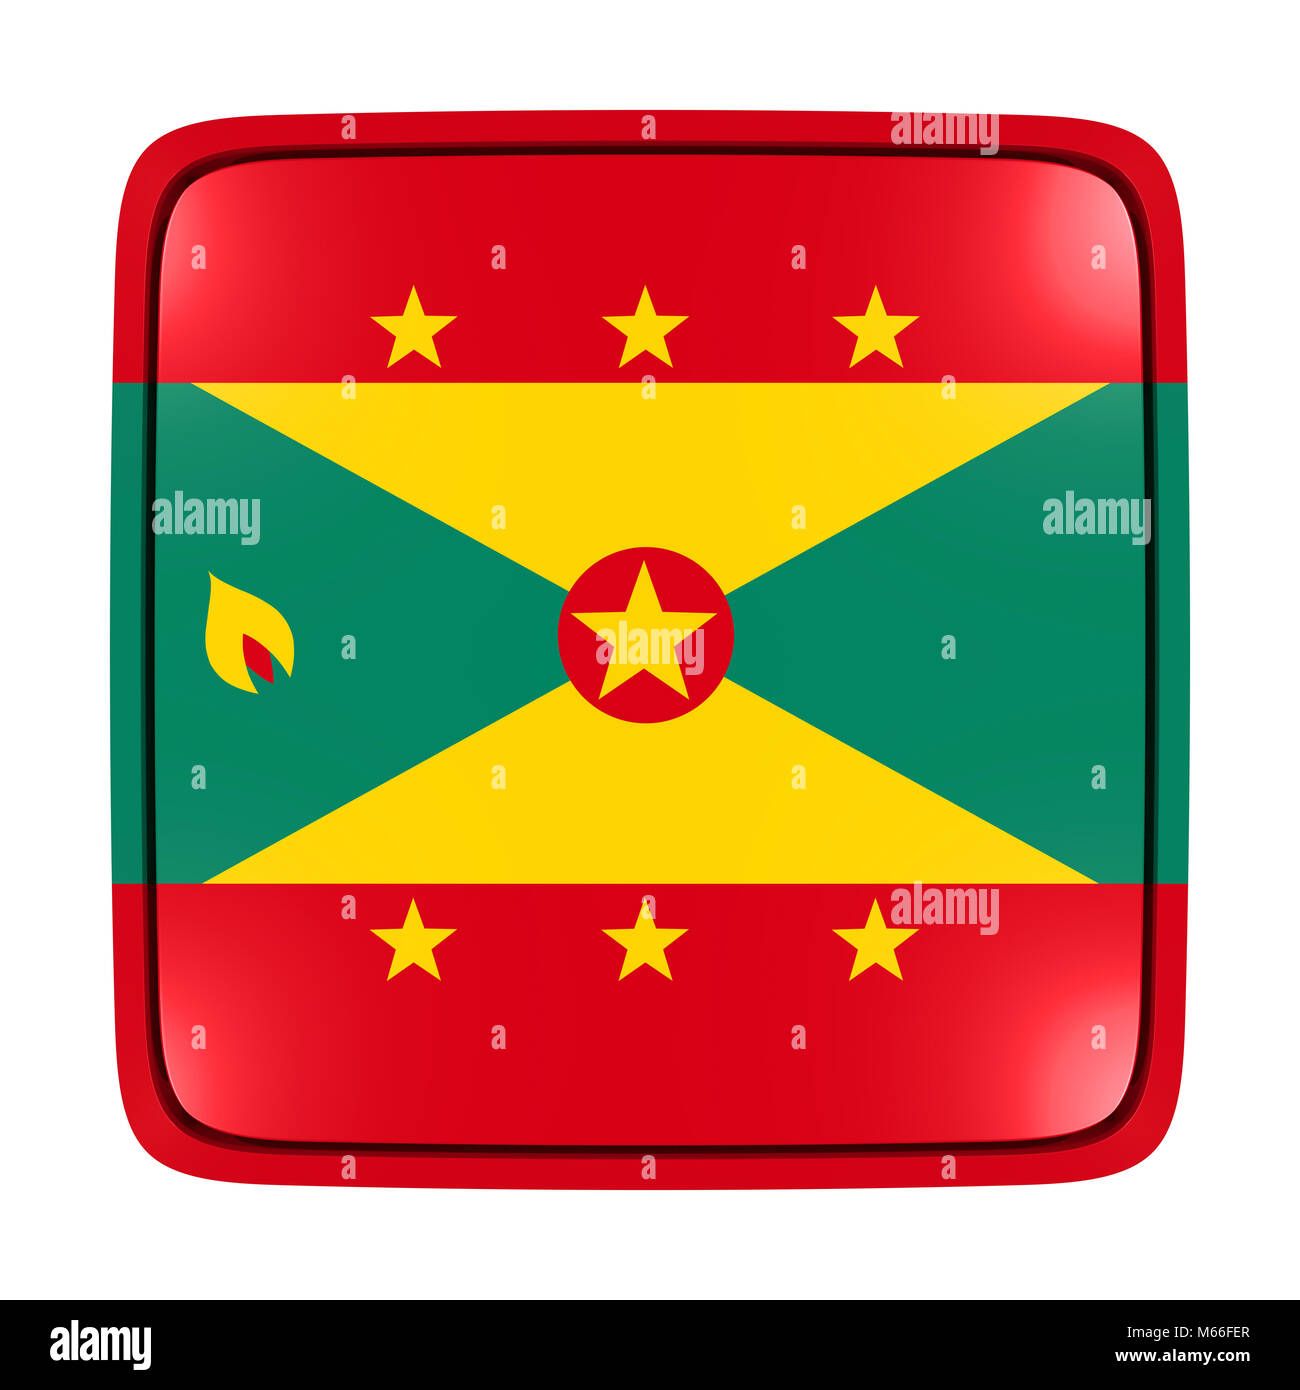 3d rendering of a Grenada flag icon. Isolated on white background. Stock Photo